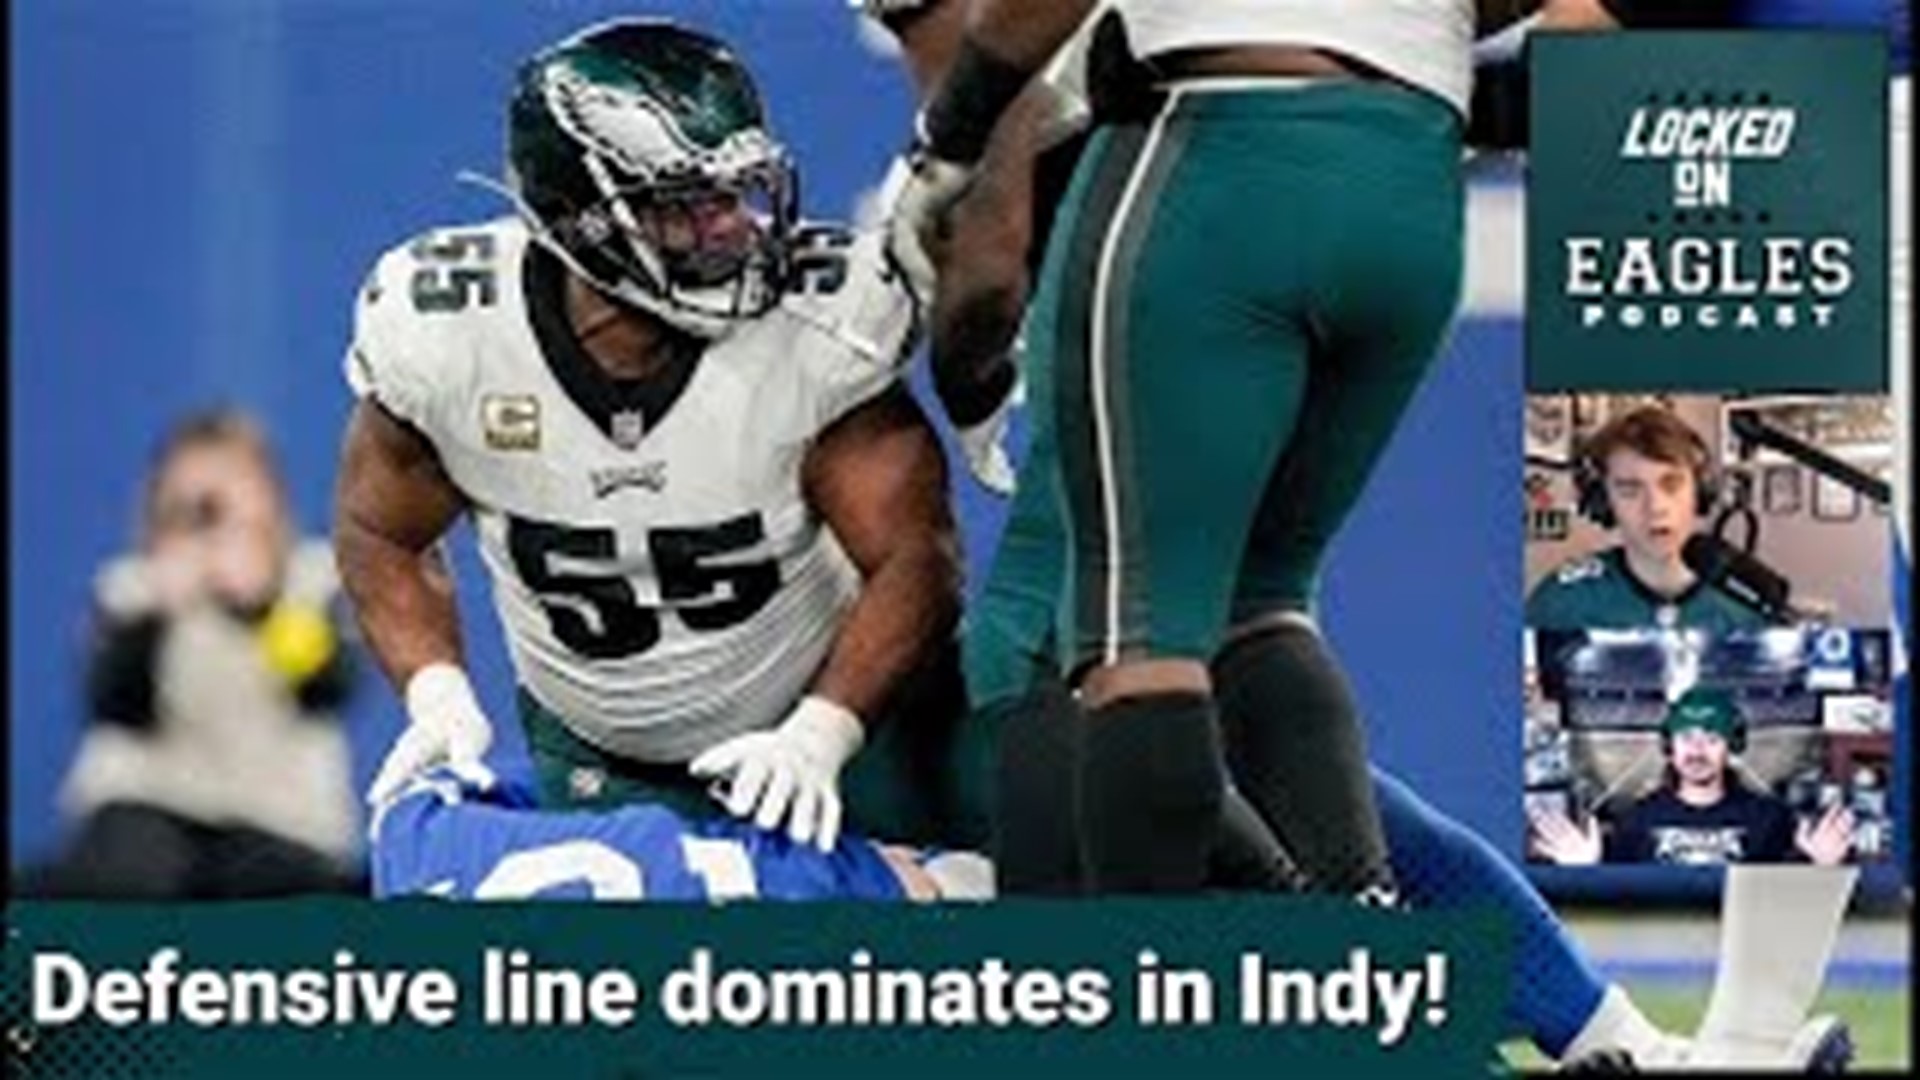 The Philadelphia Eagles defensive line was the key to a win against the Indianapolis Colts on Sunday.